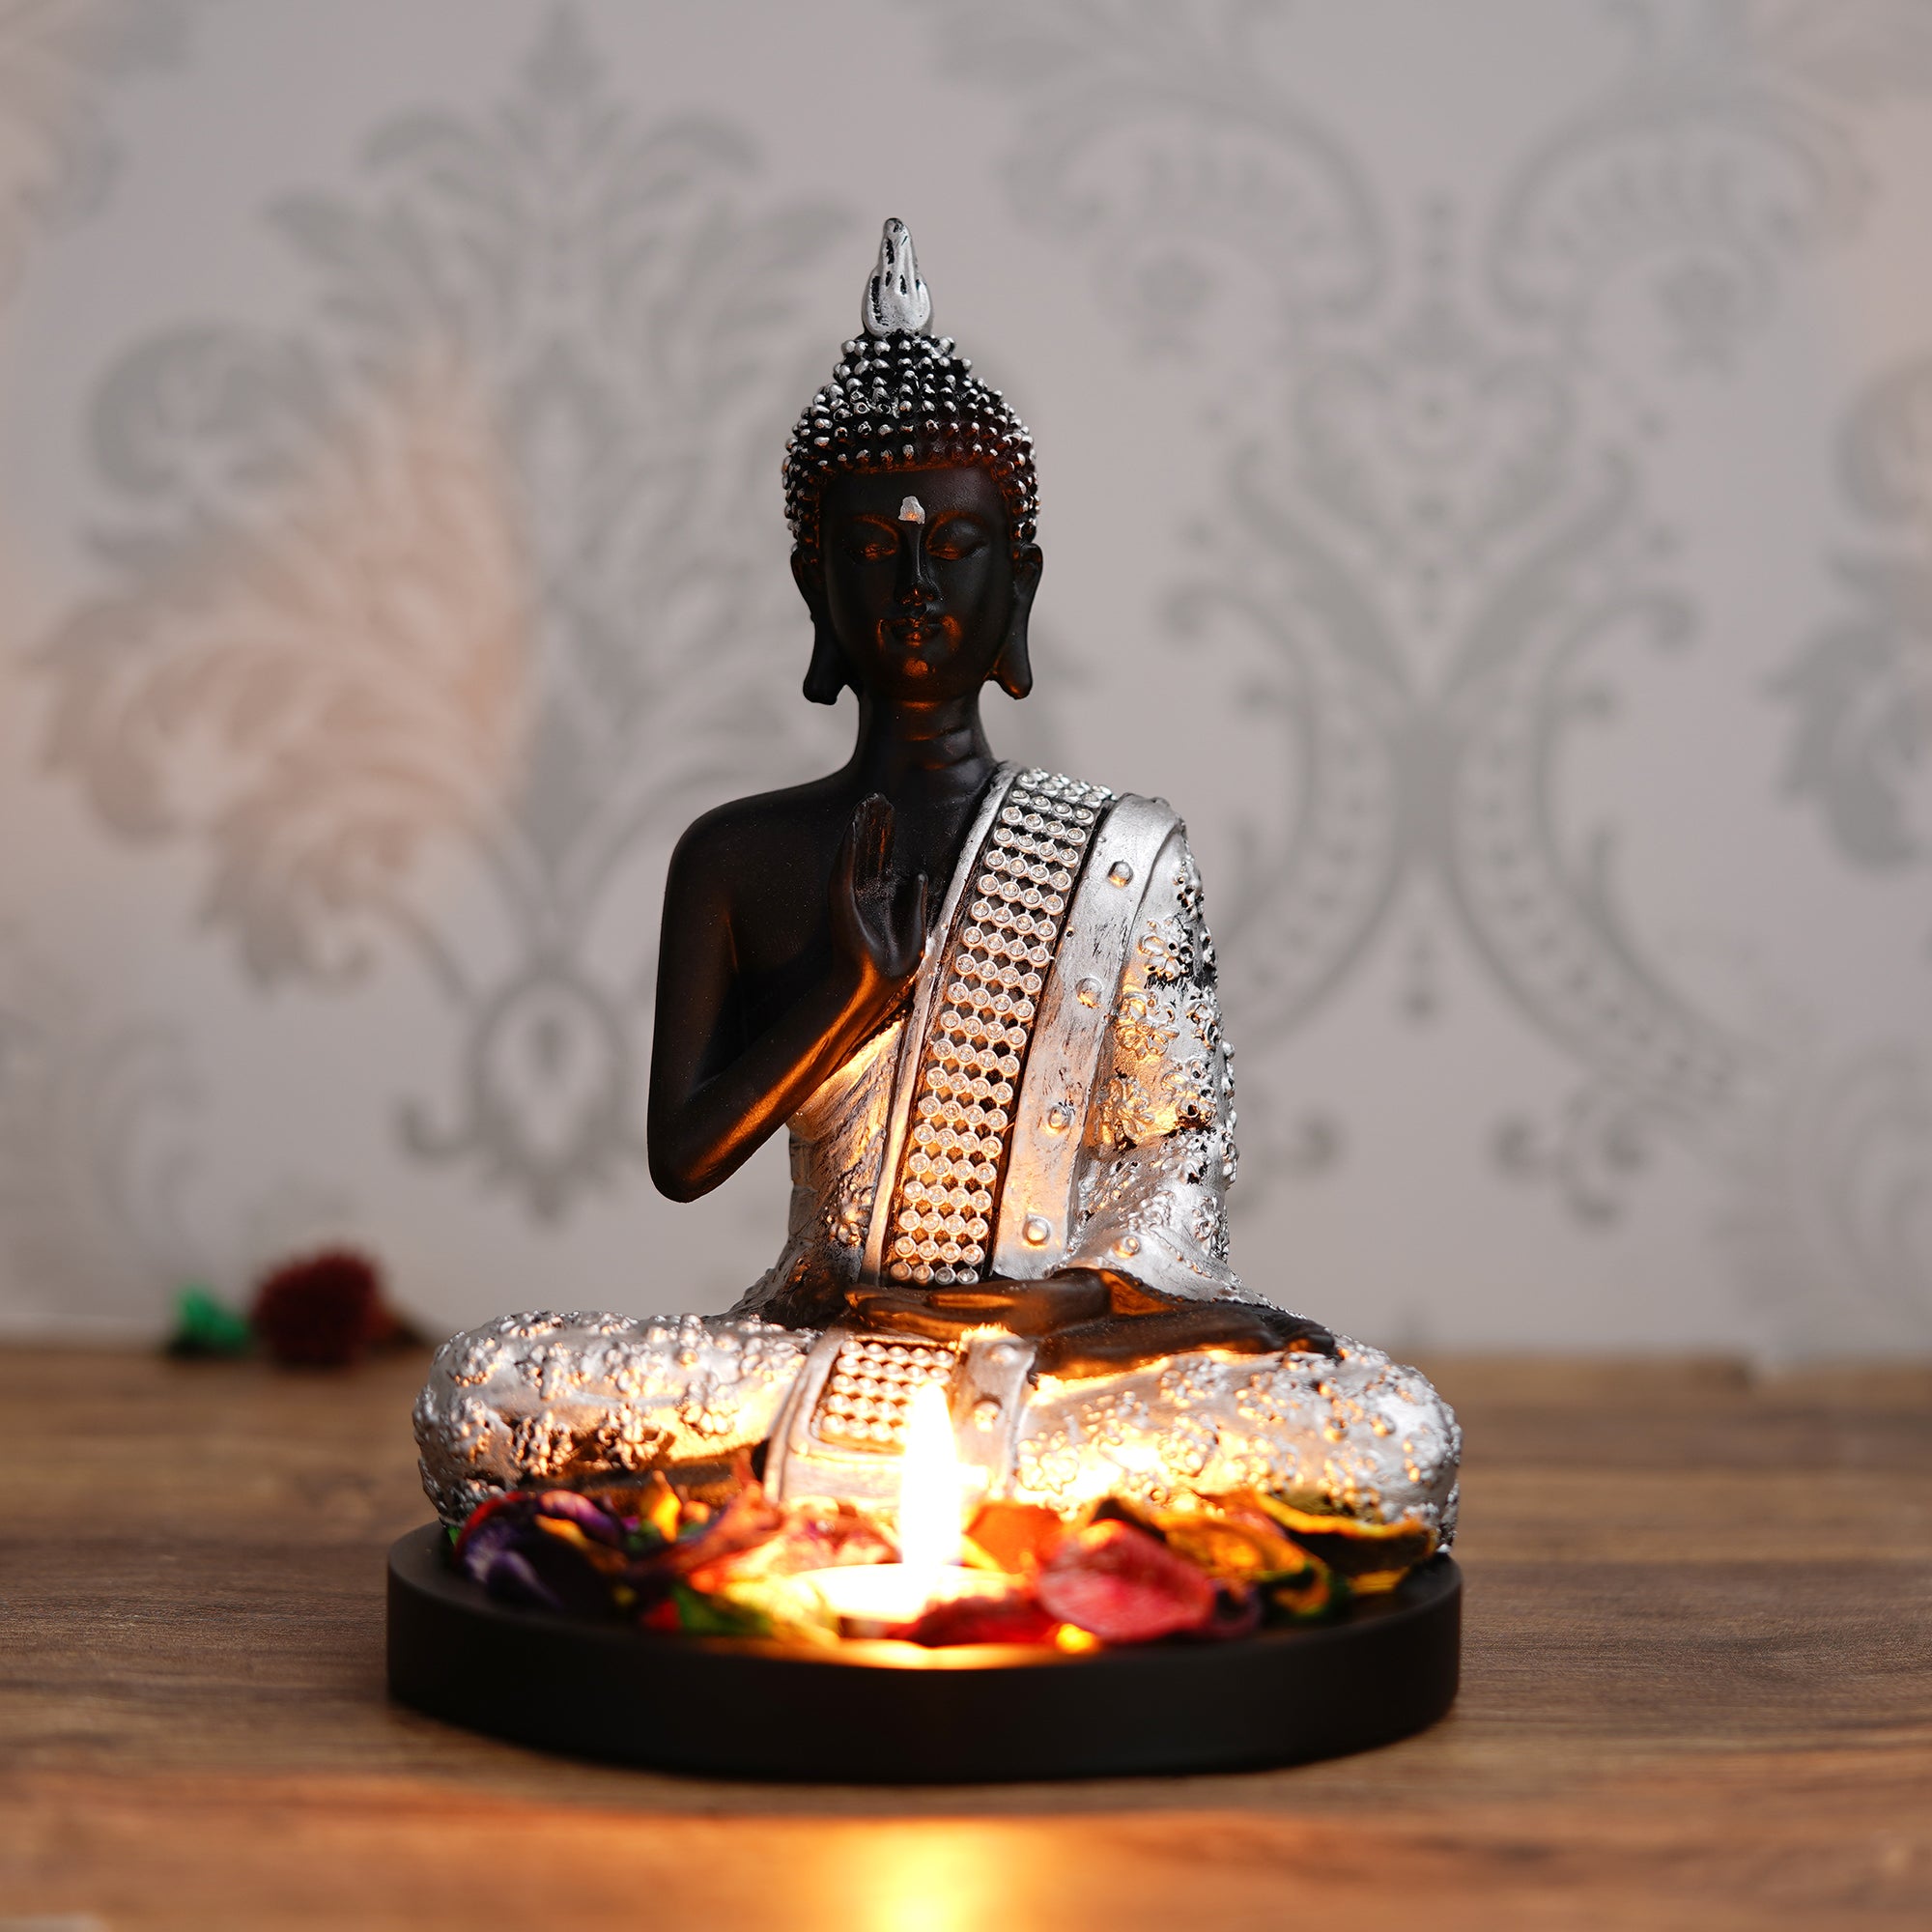 Polyresin Black and Silver Handcrafted Meditating Blessing Buddha Statue with Wooden Base, Fragranced Petals and Tealight 1